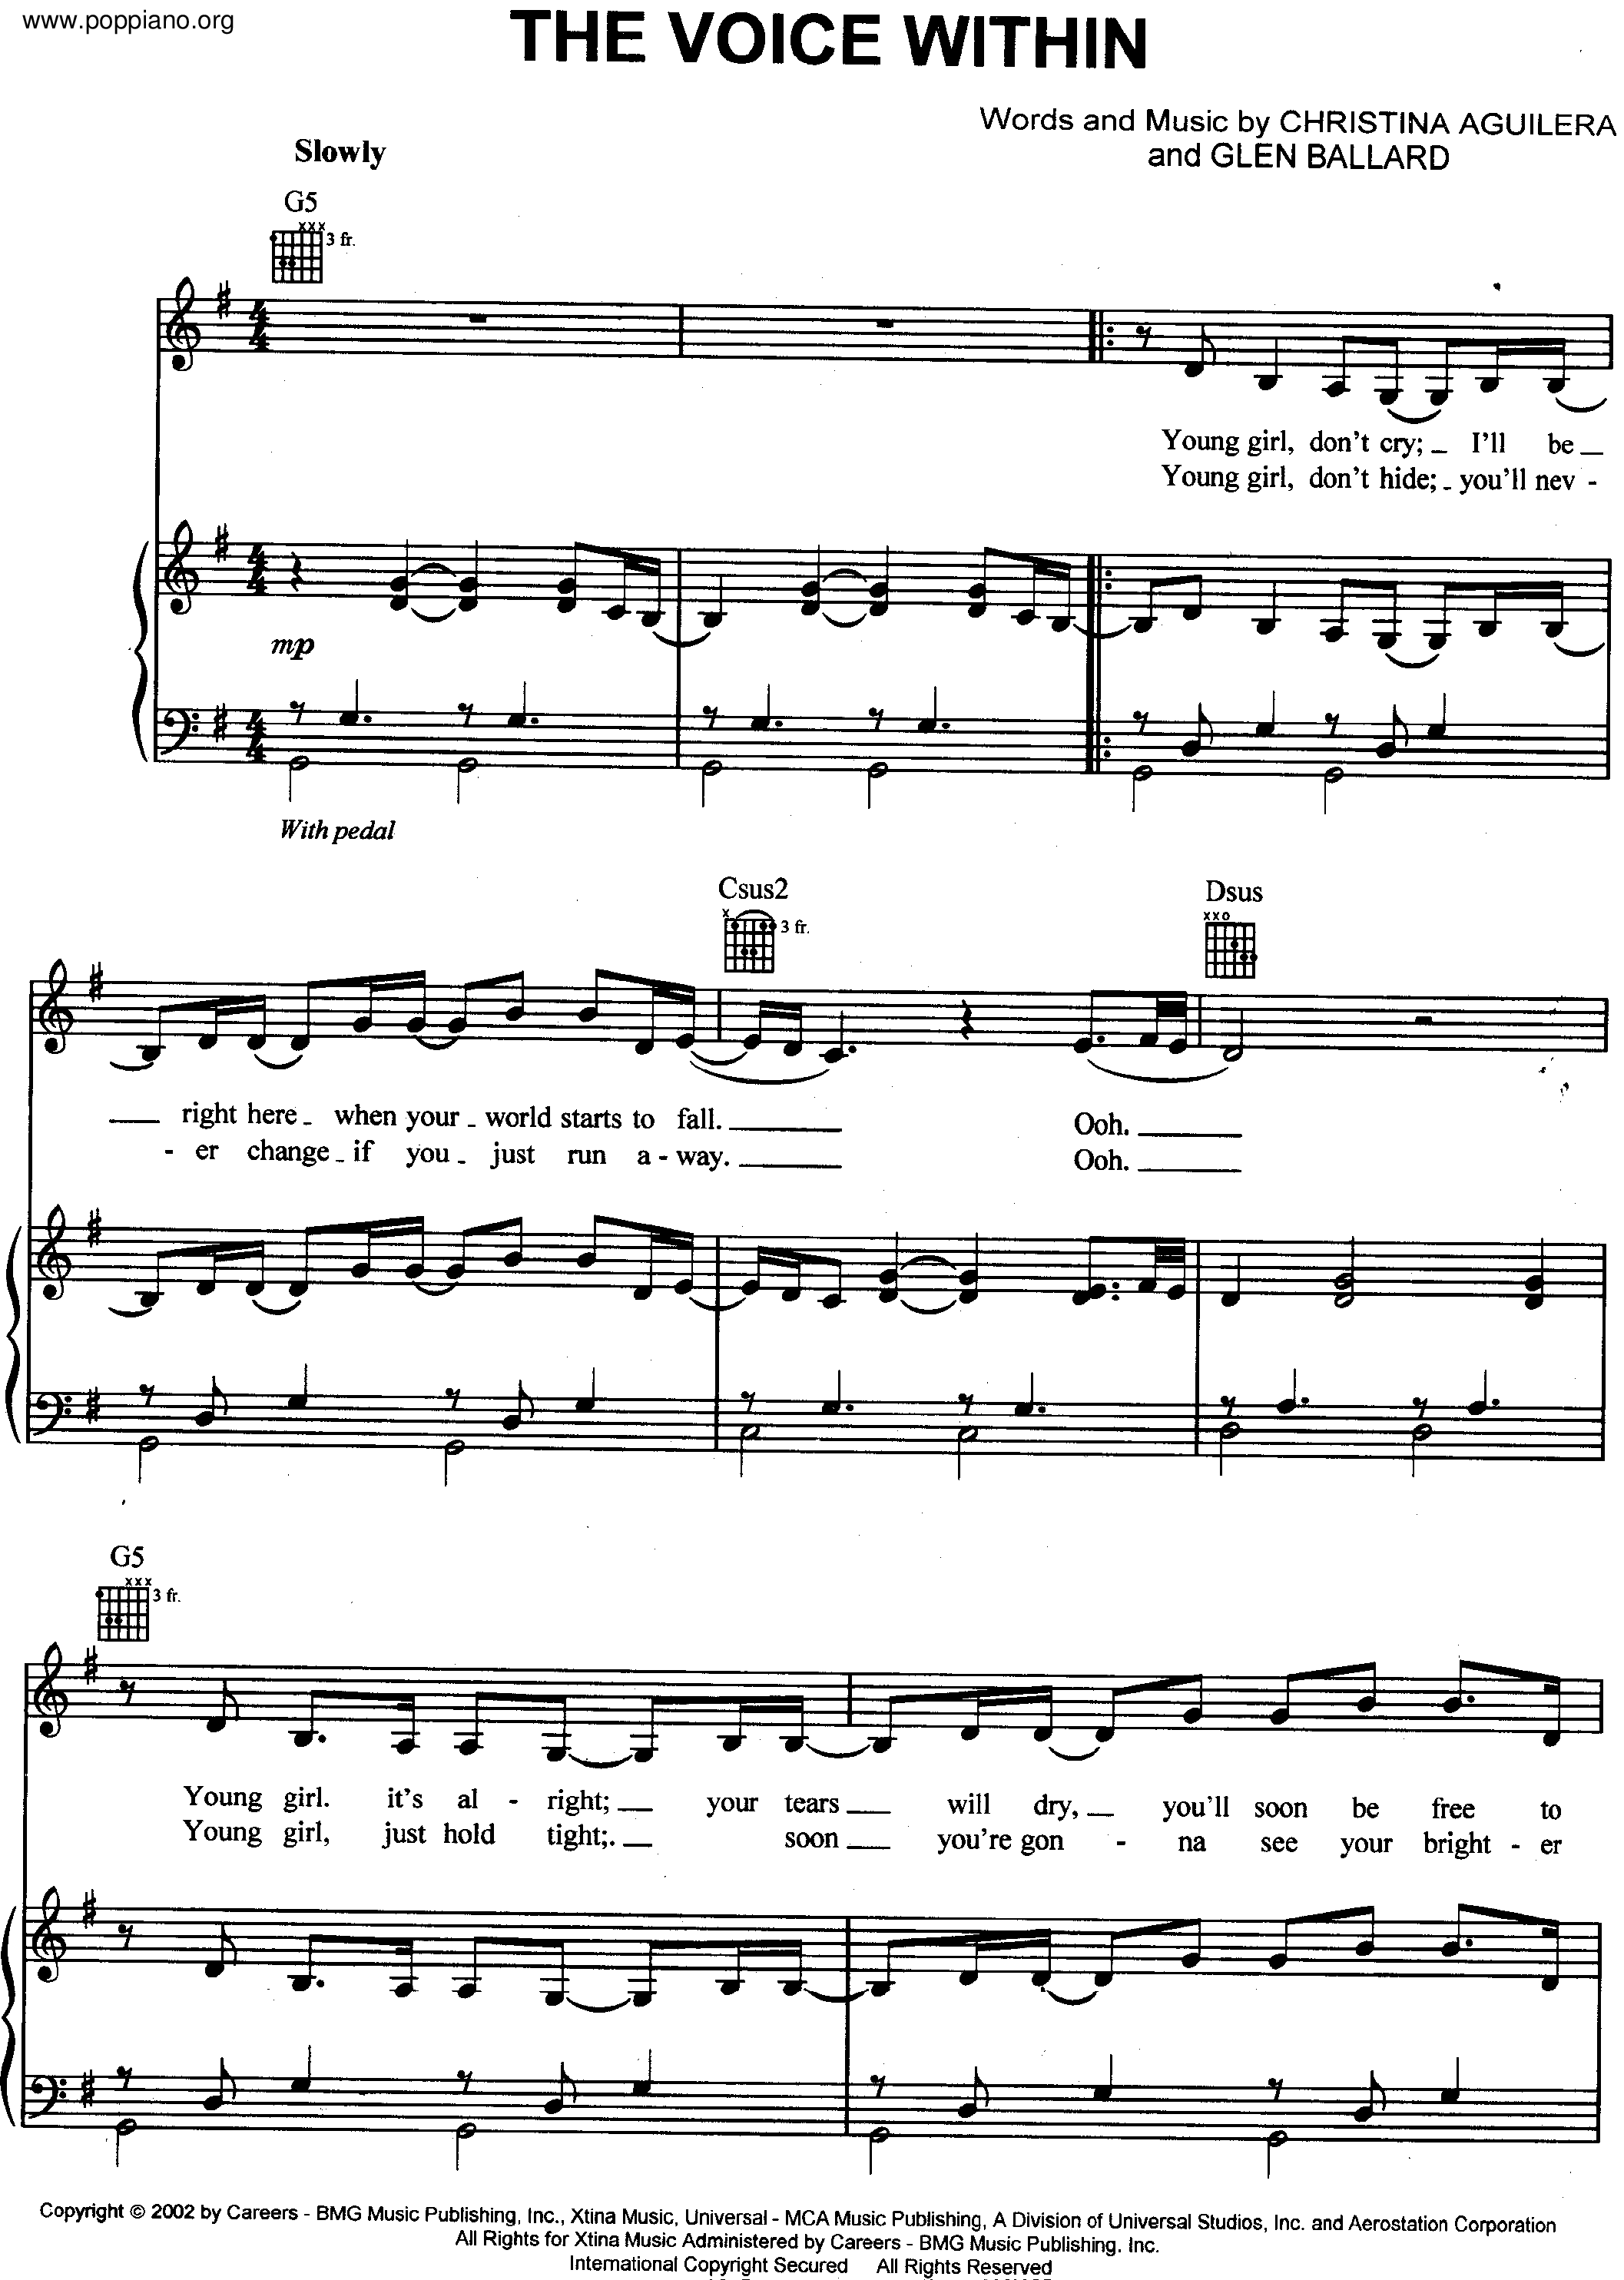 The Voice Within Score